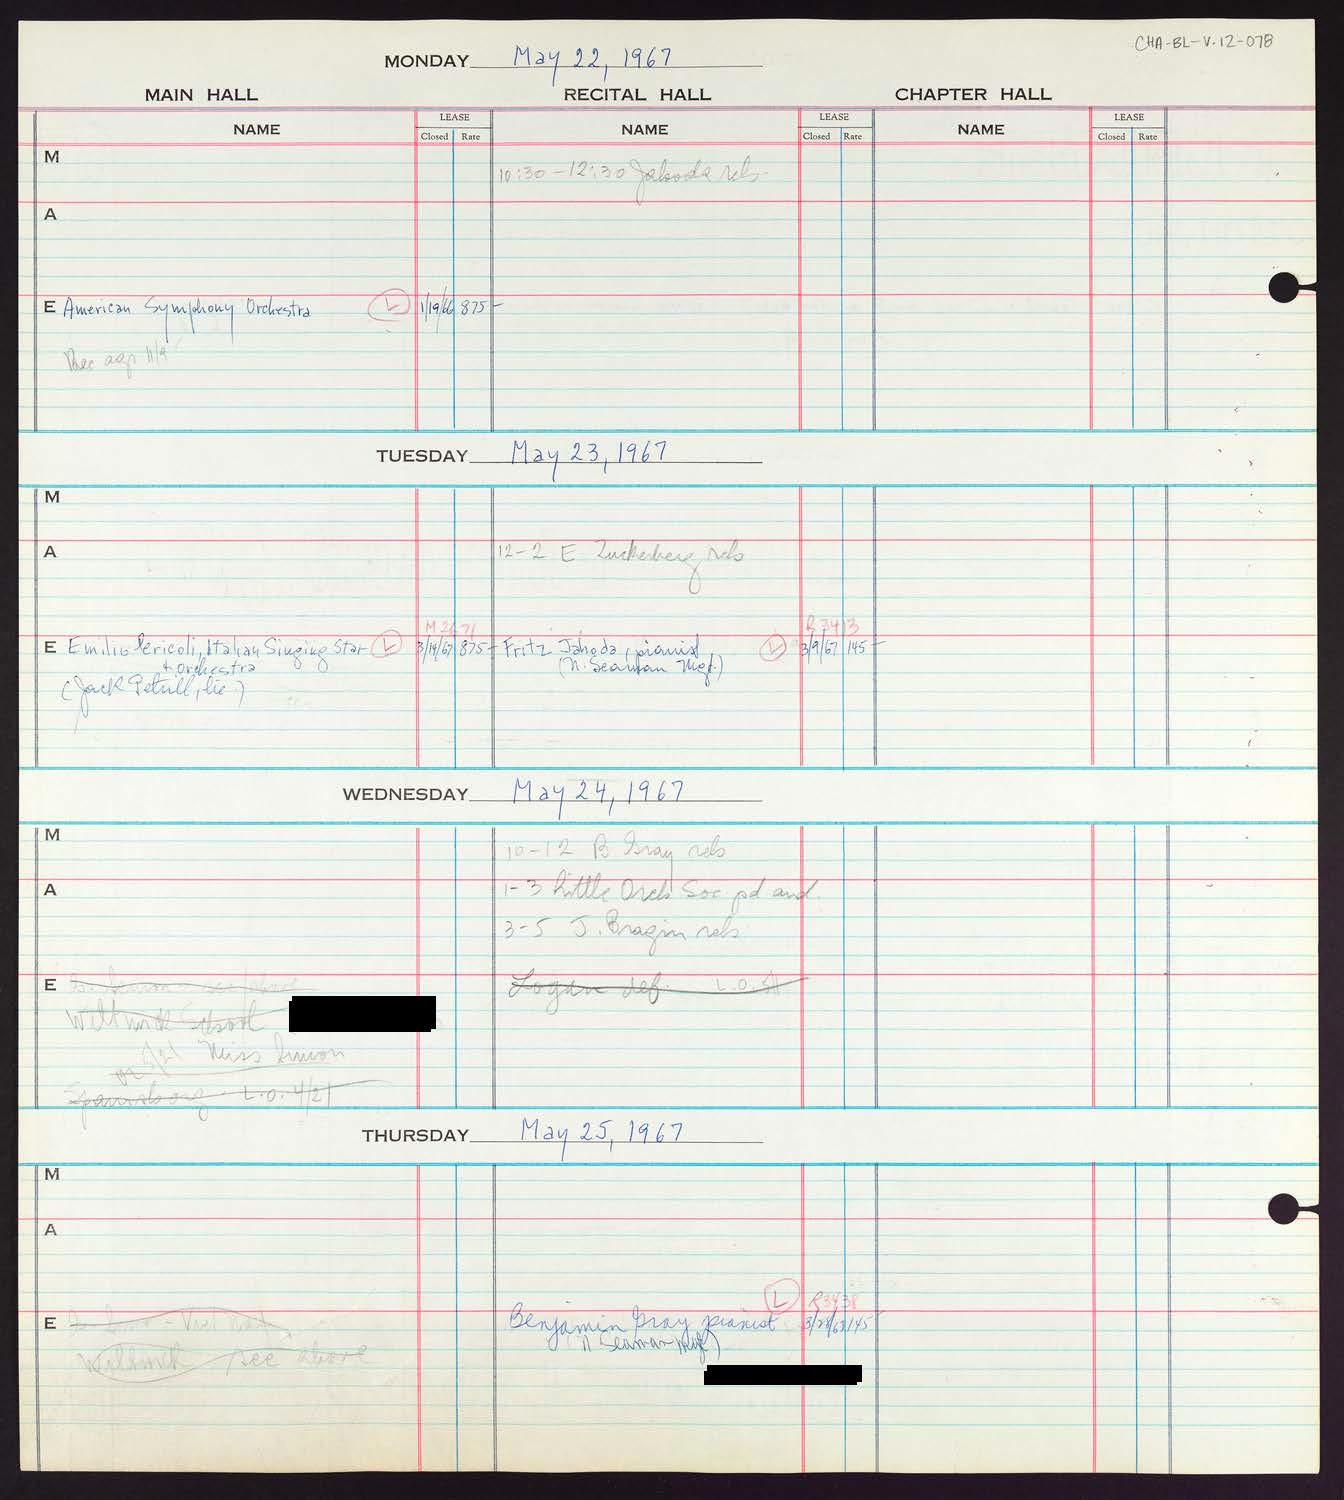 Carnegie Hall Booking Ledger, volume 12, page 78